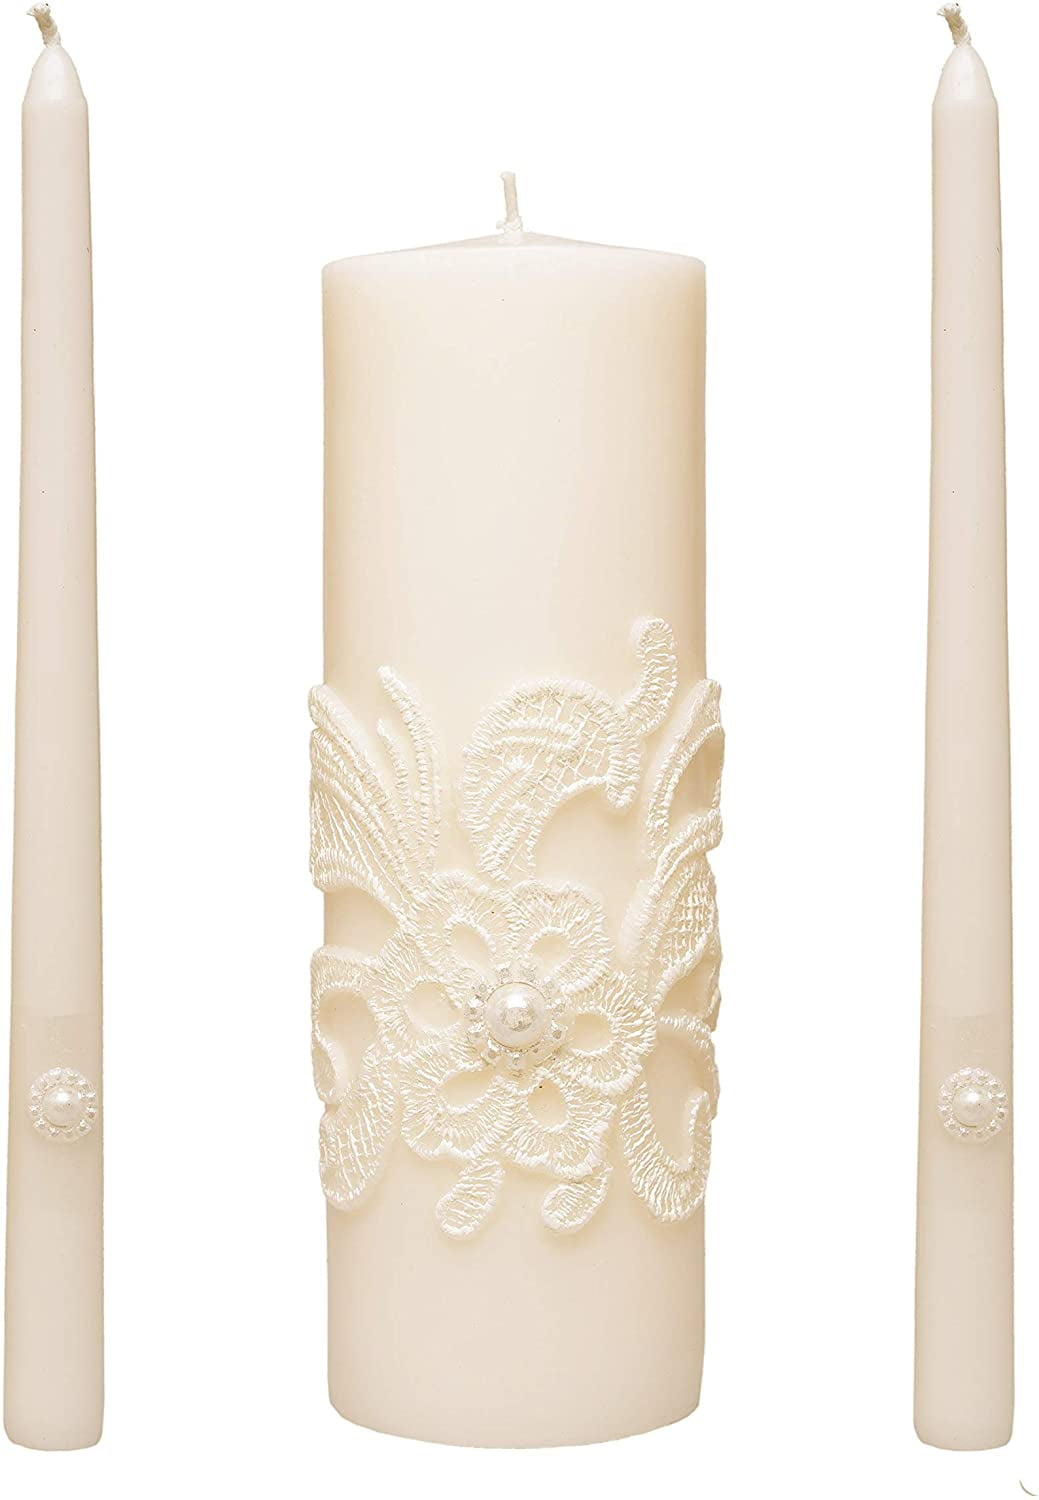 Tapers Plain Unity Wedding Ceremony Candle Set In White Or Ivory Unity Candle 